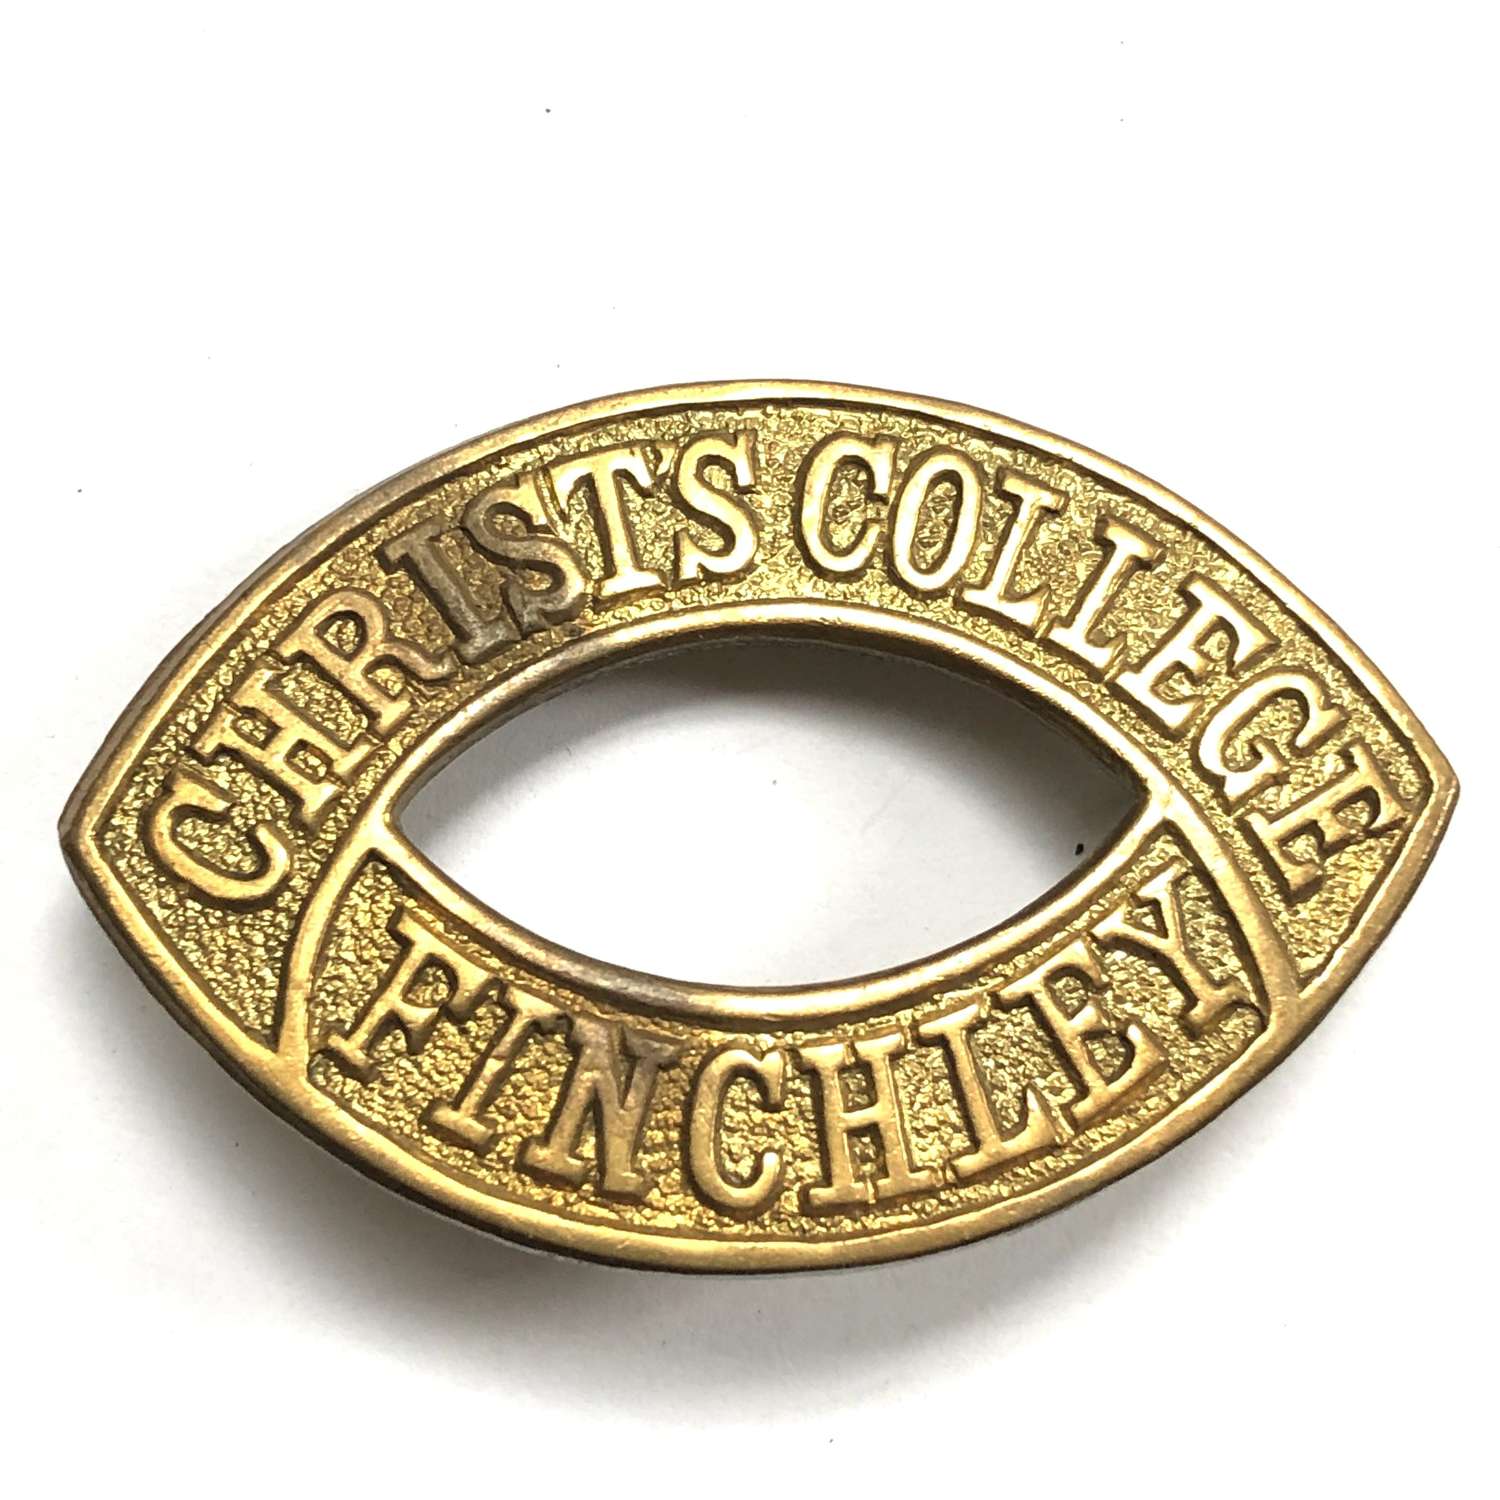 CHRIST'S COLLEGE / FINCHLEY shoulder title